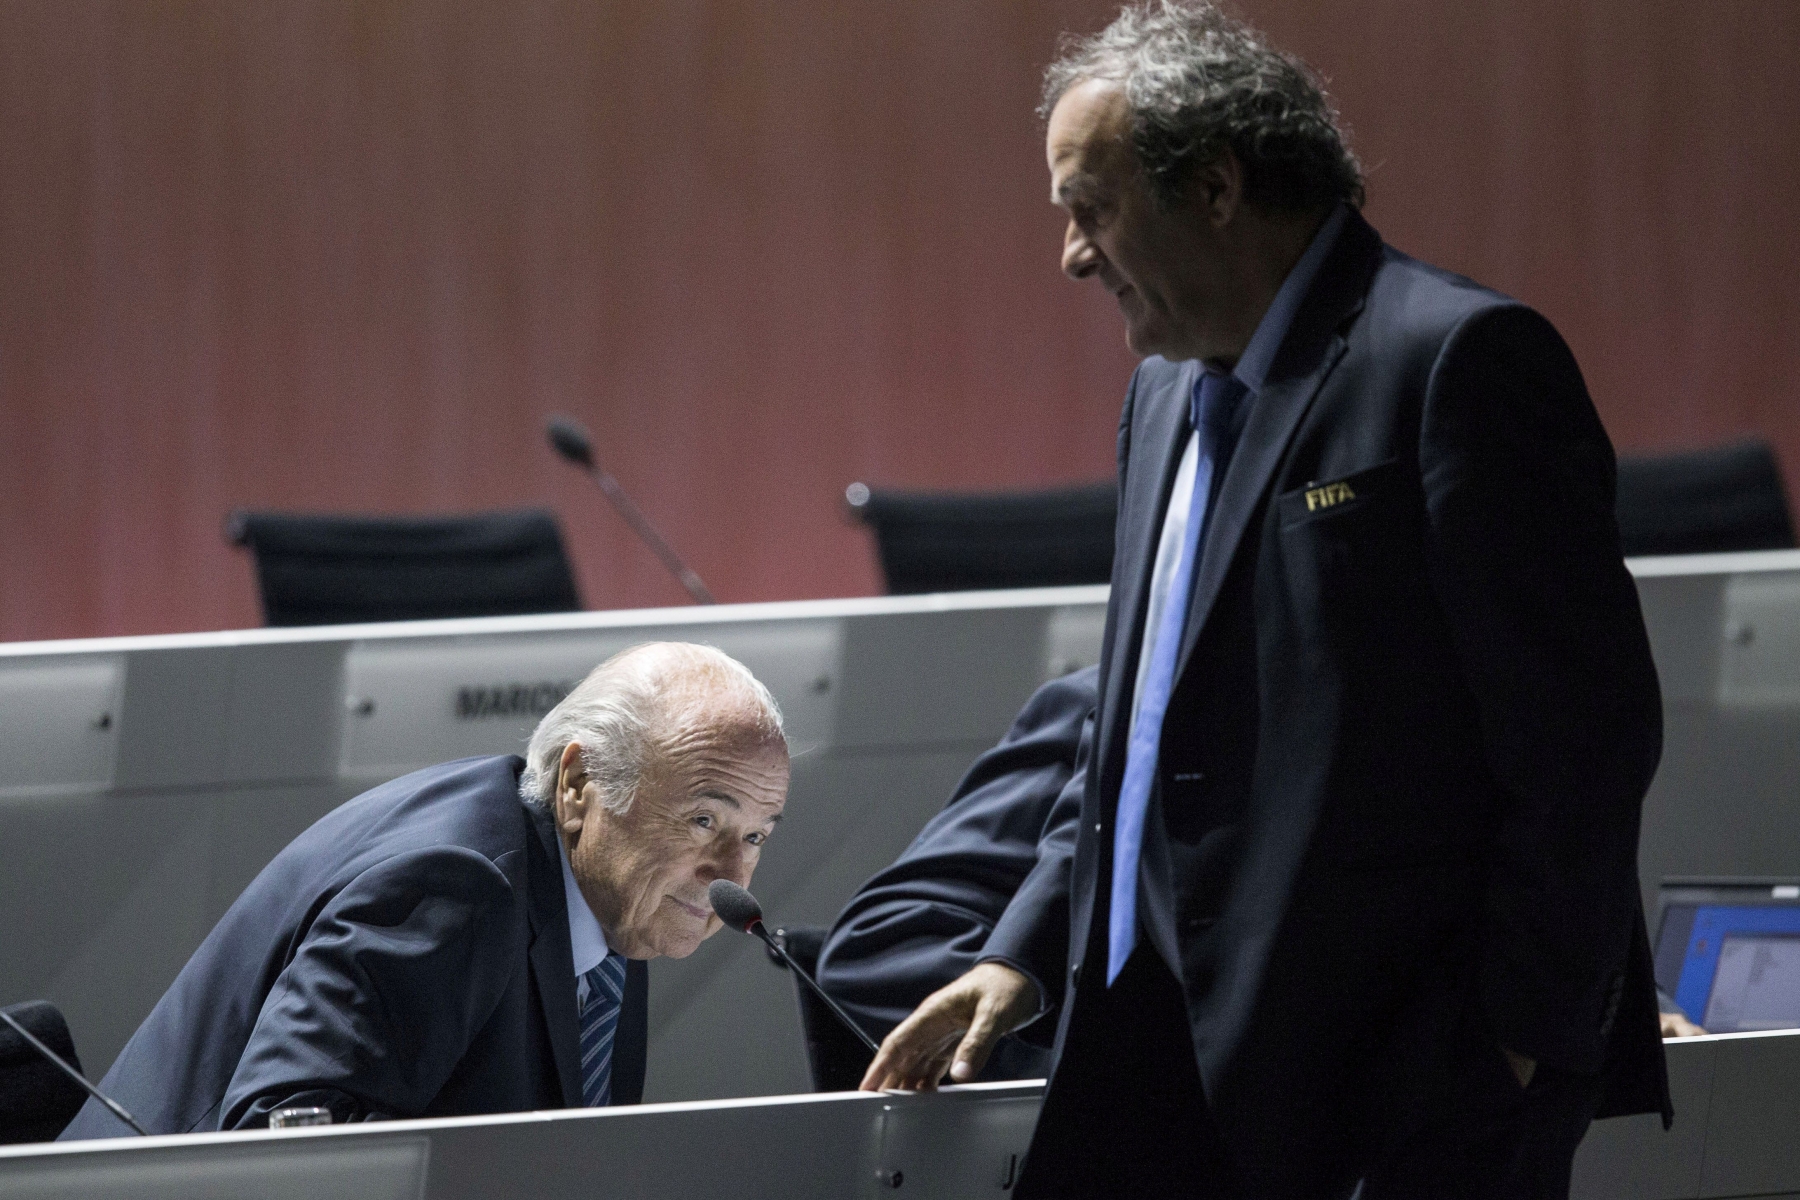 FILE - In this May 29, 2015 file photo FIFA president Joseph S. Blatter, left, takes a seat after welcoming UEFA president Michel Platini, right, during the 65th FIFA Congress held at the Hallenstadion in Zurich, Switzerland. Sepp Blatter and Michel Platini have been banned for 8 years, the FIFA ethics committee said Monday,  Dec. 21, 2015.  (Patrick B. Kraemer/Keystone)